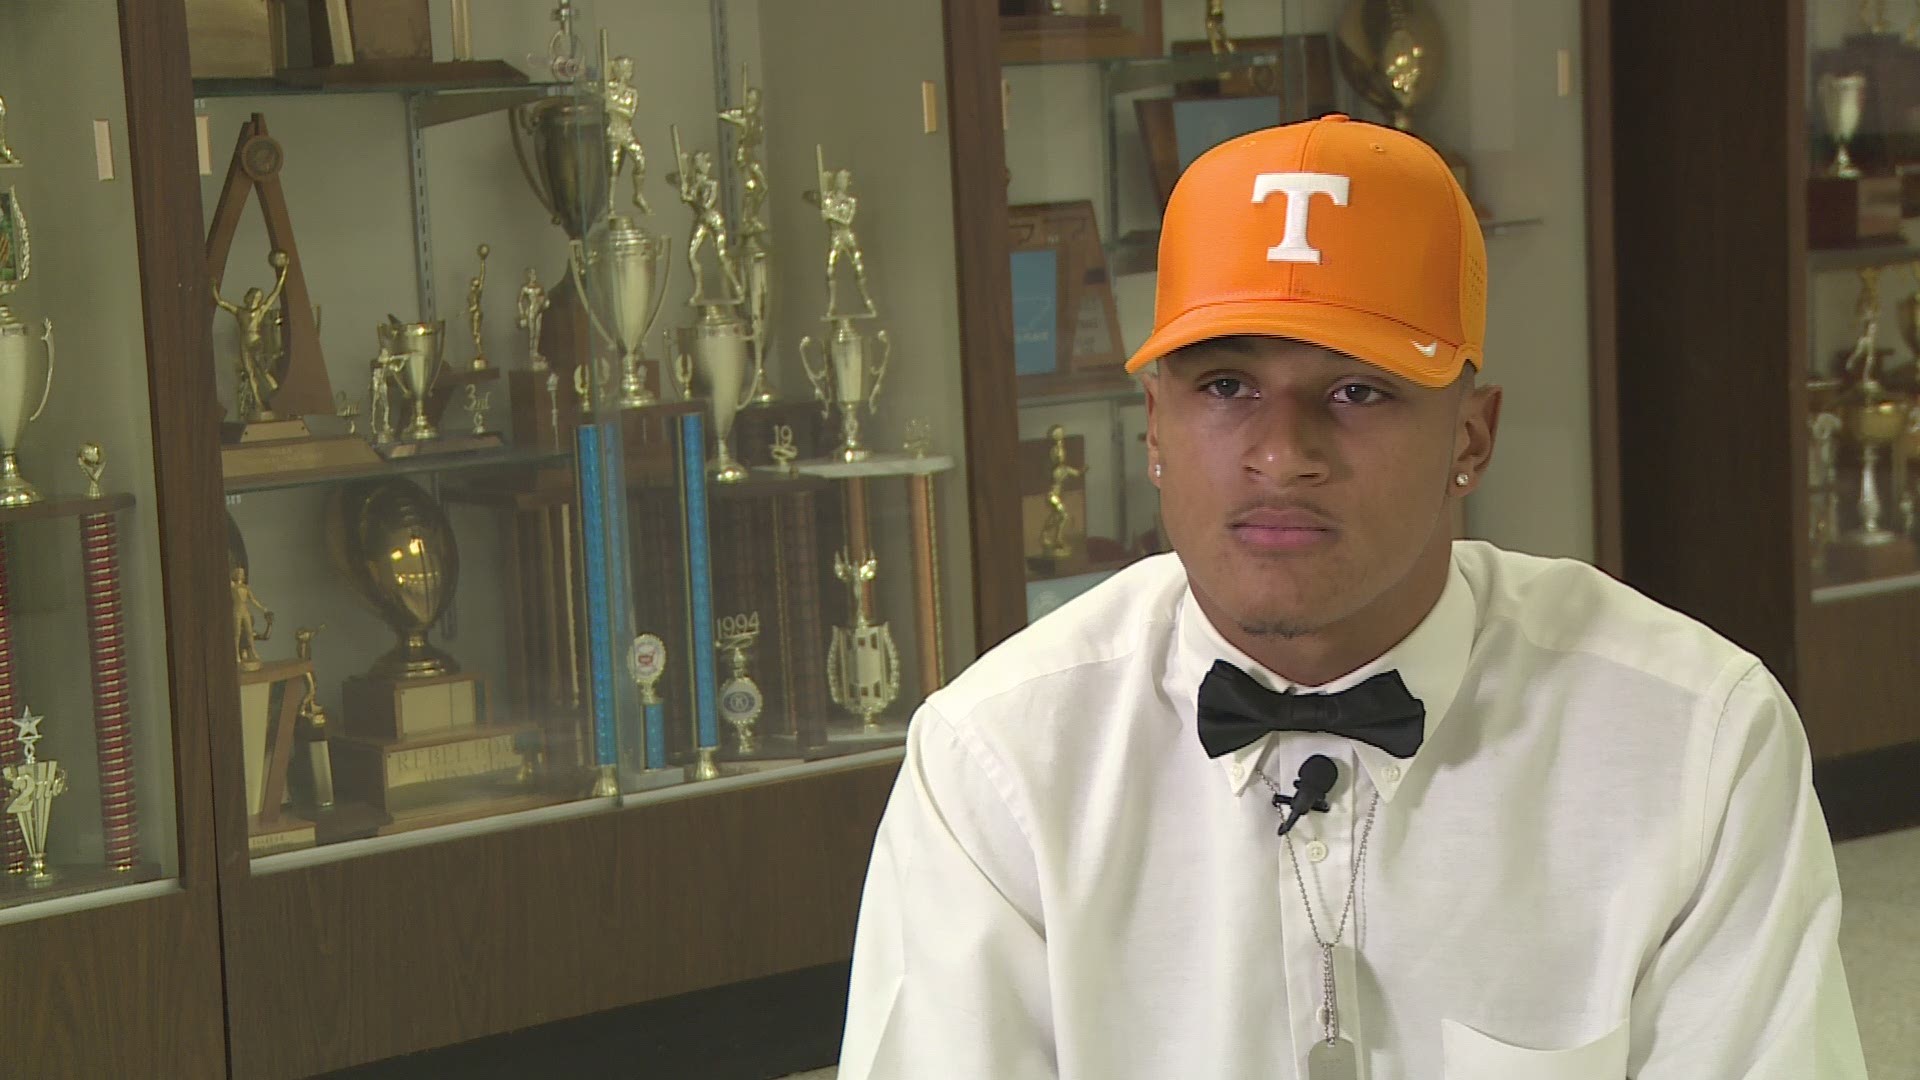 Alontae Taylor will enroll at Tennessee in January to begin his college career. The four-star receiver from Coffee County High School in Manchester, Tenn. signed his letter of intent on Friday.